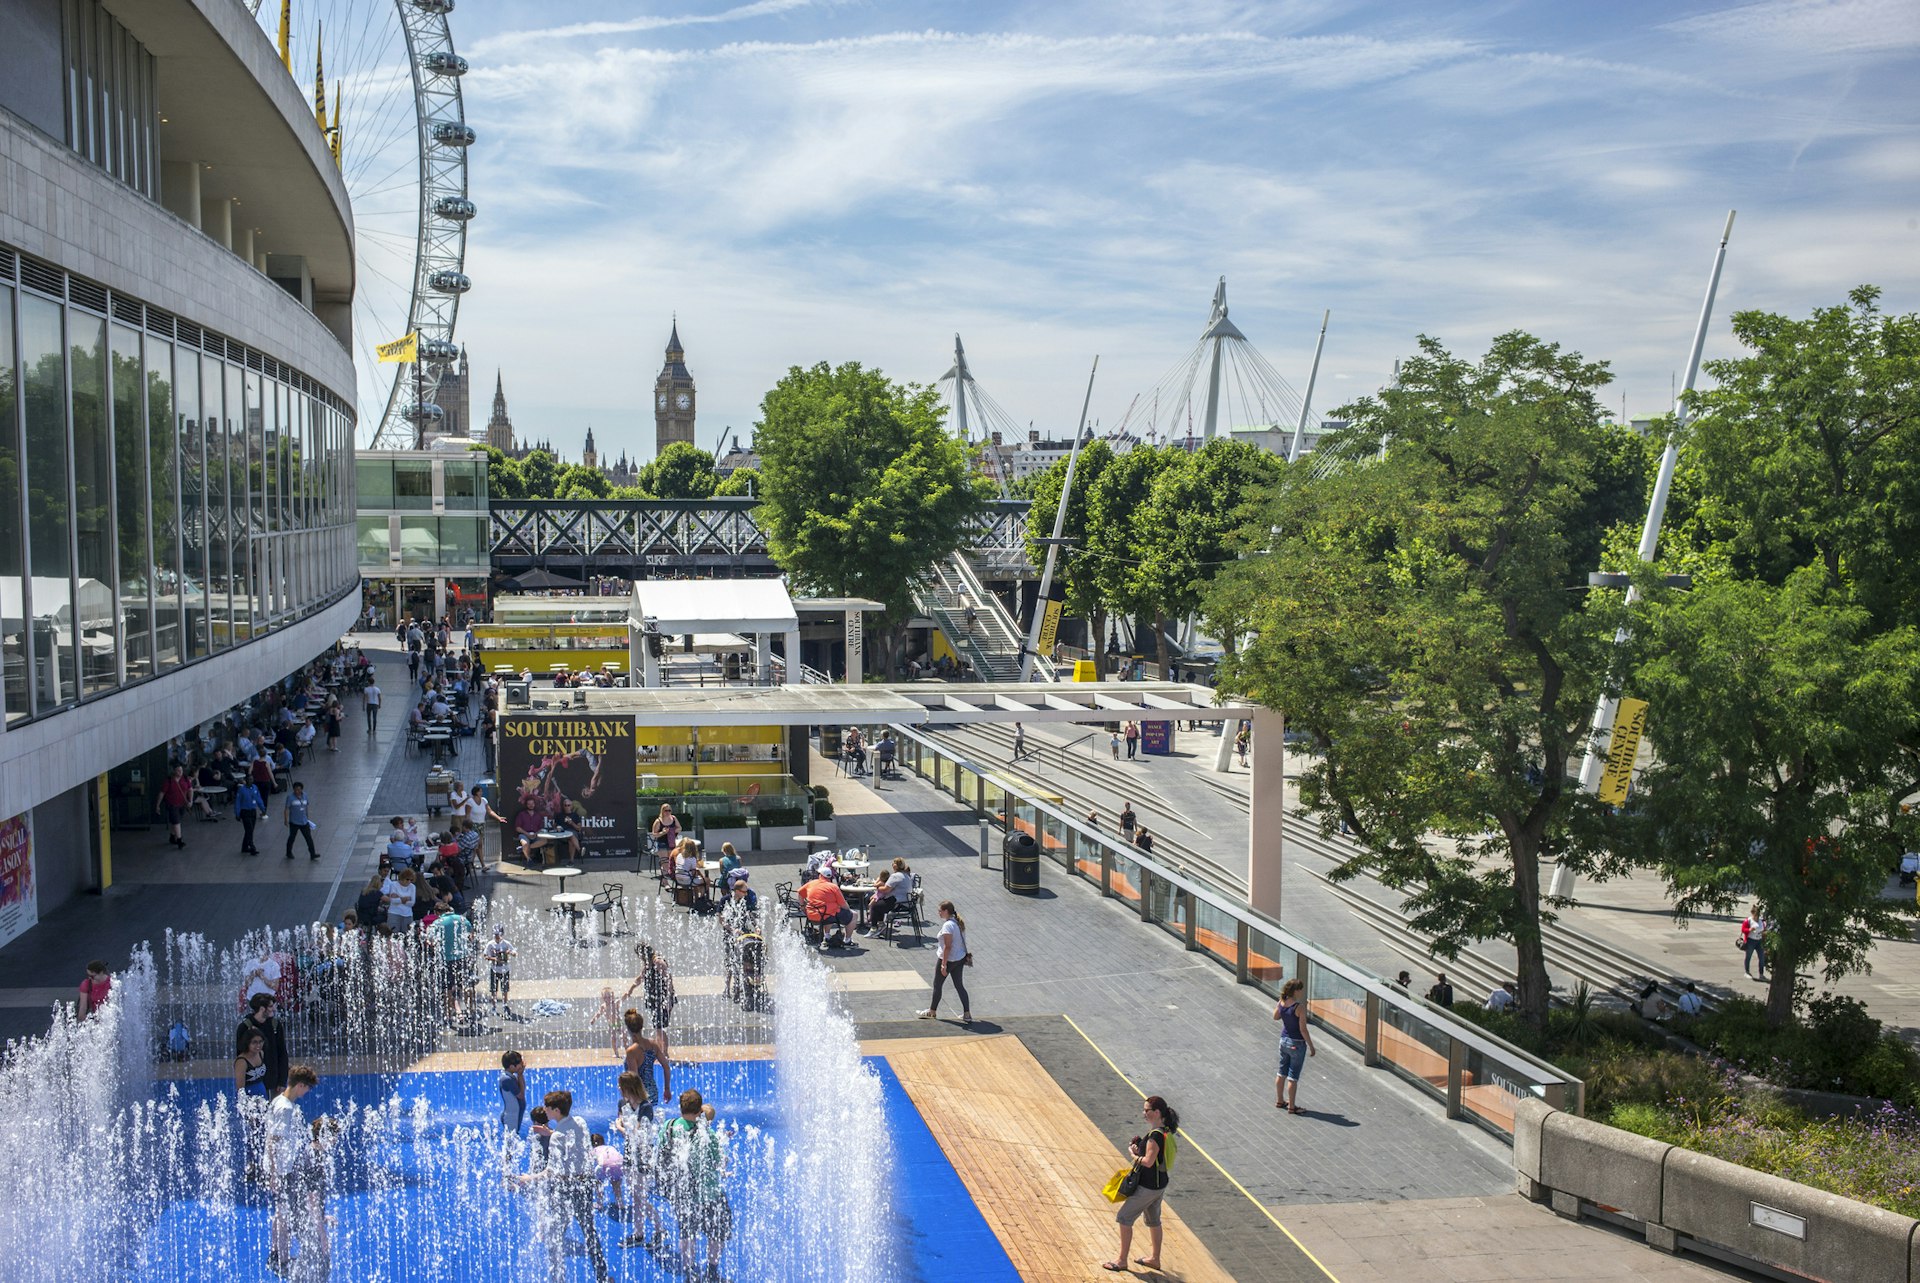 Tucked away on the upper terrace of the South Bank centre in summer is the "Appearing Rooms"  Fountain - popular with families